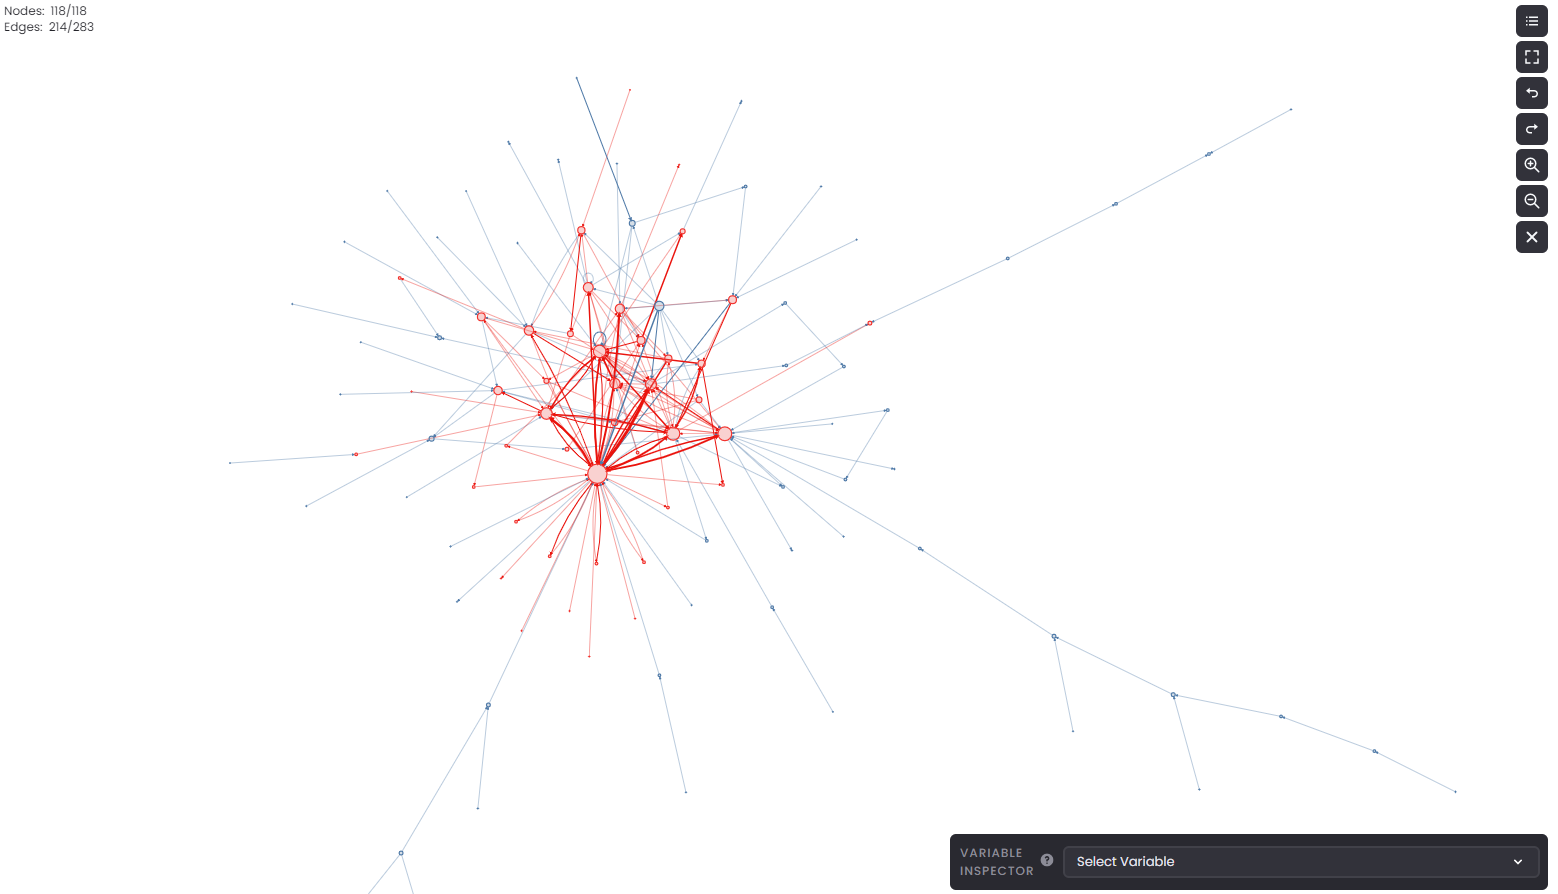 Nodes represent user wallets - those marked as wash-traded are in red while the other user wallets are in blue.